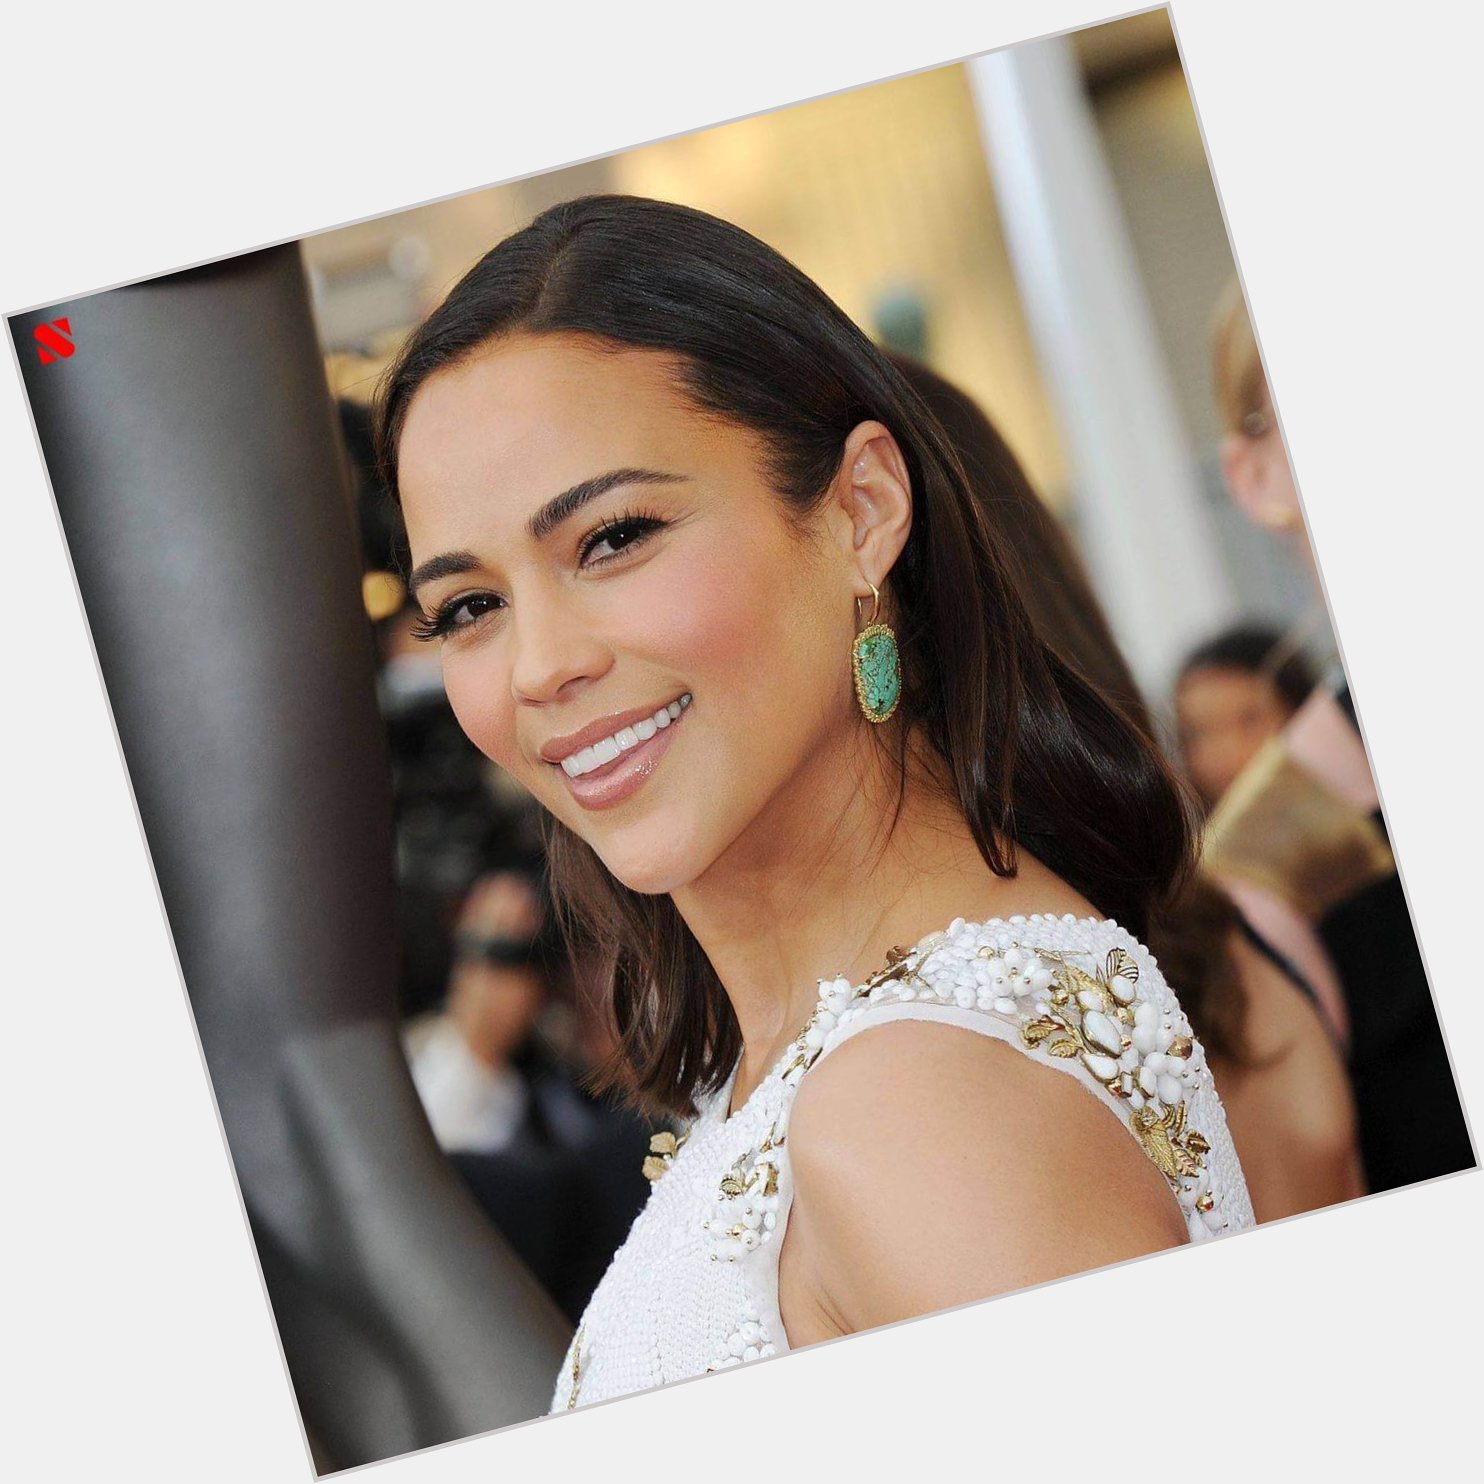 Happy birthday to Paula Patton!!

Which is your favorite performance by the actress? 